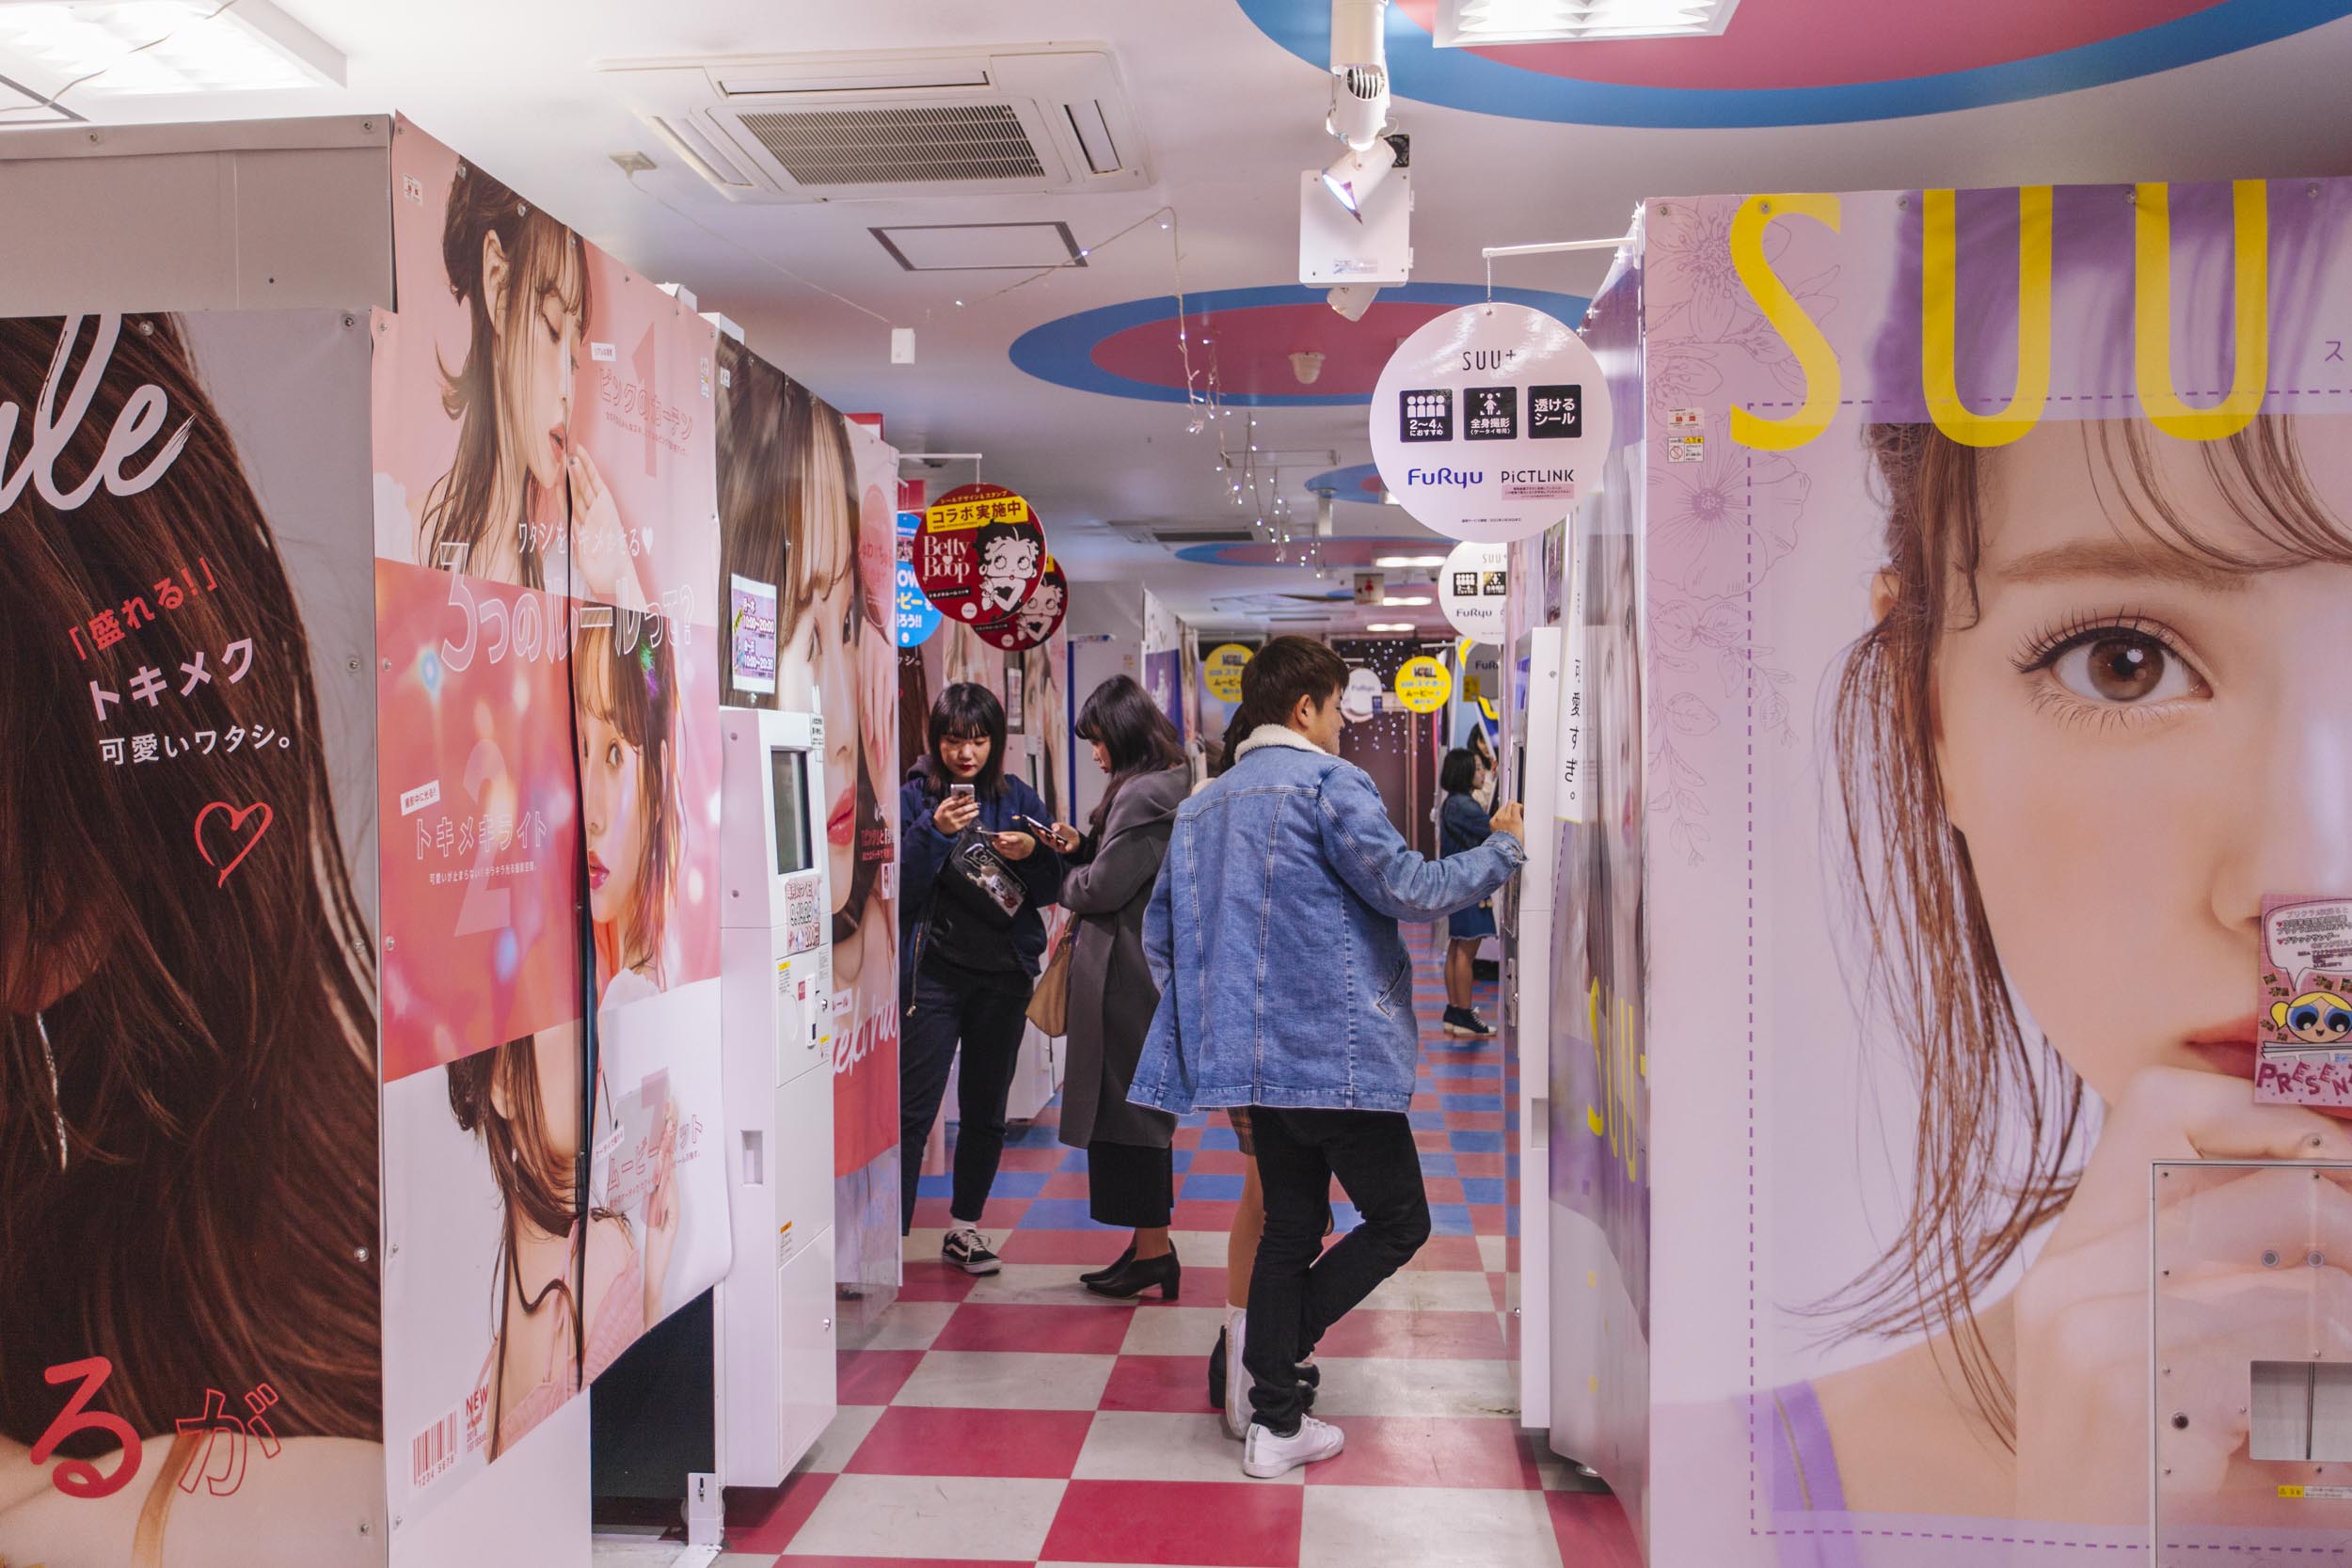 Take A Purikura And Meet Your Teenage Alter Ego When In Tokyo Tokyo S Art Design And Architecture Guide